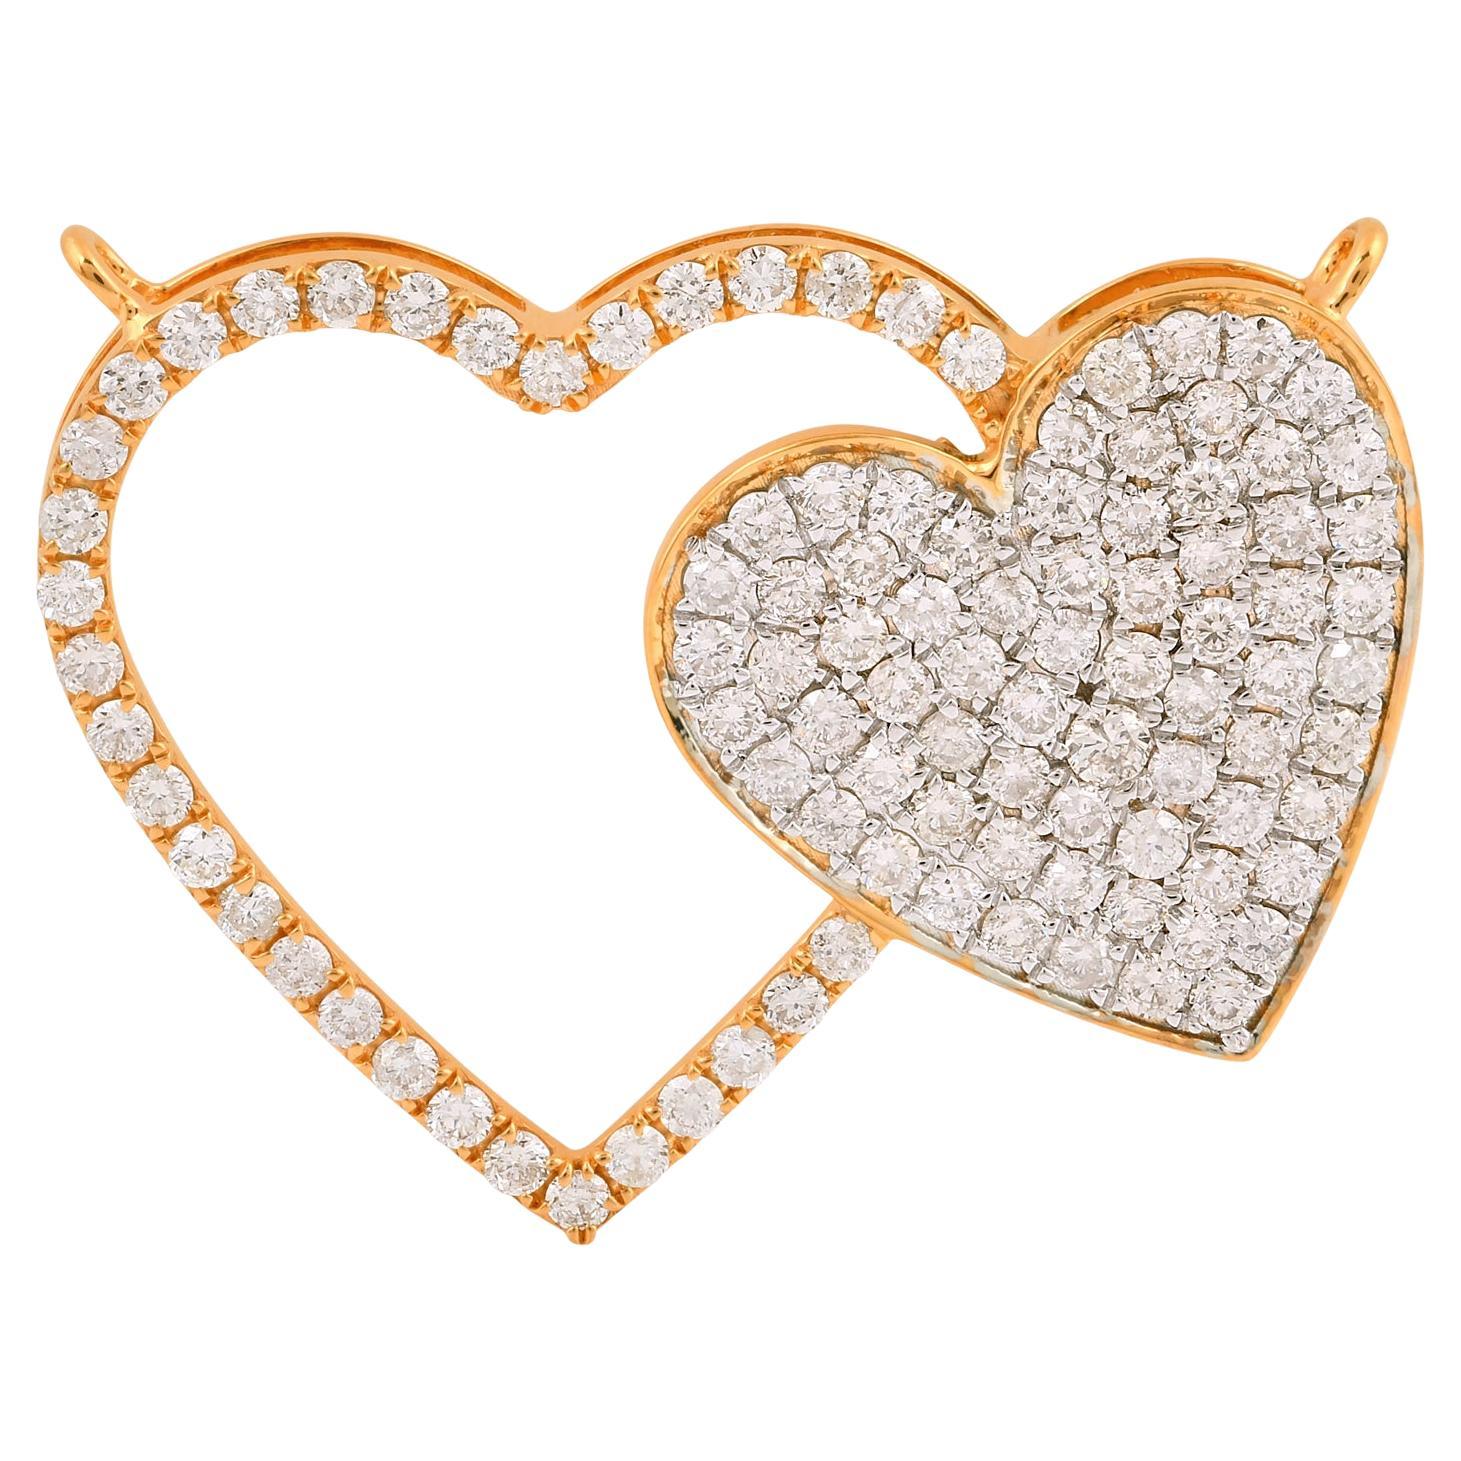 1.50 Carat Diamond Pave Double Heart Charm Pendant Solid 14k Yellow Gold Jewelry For Sale